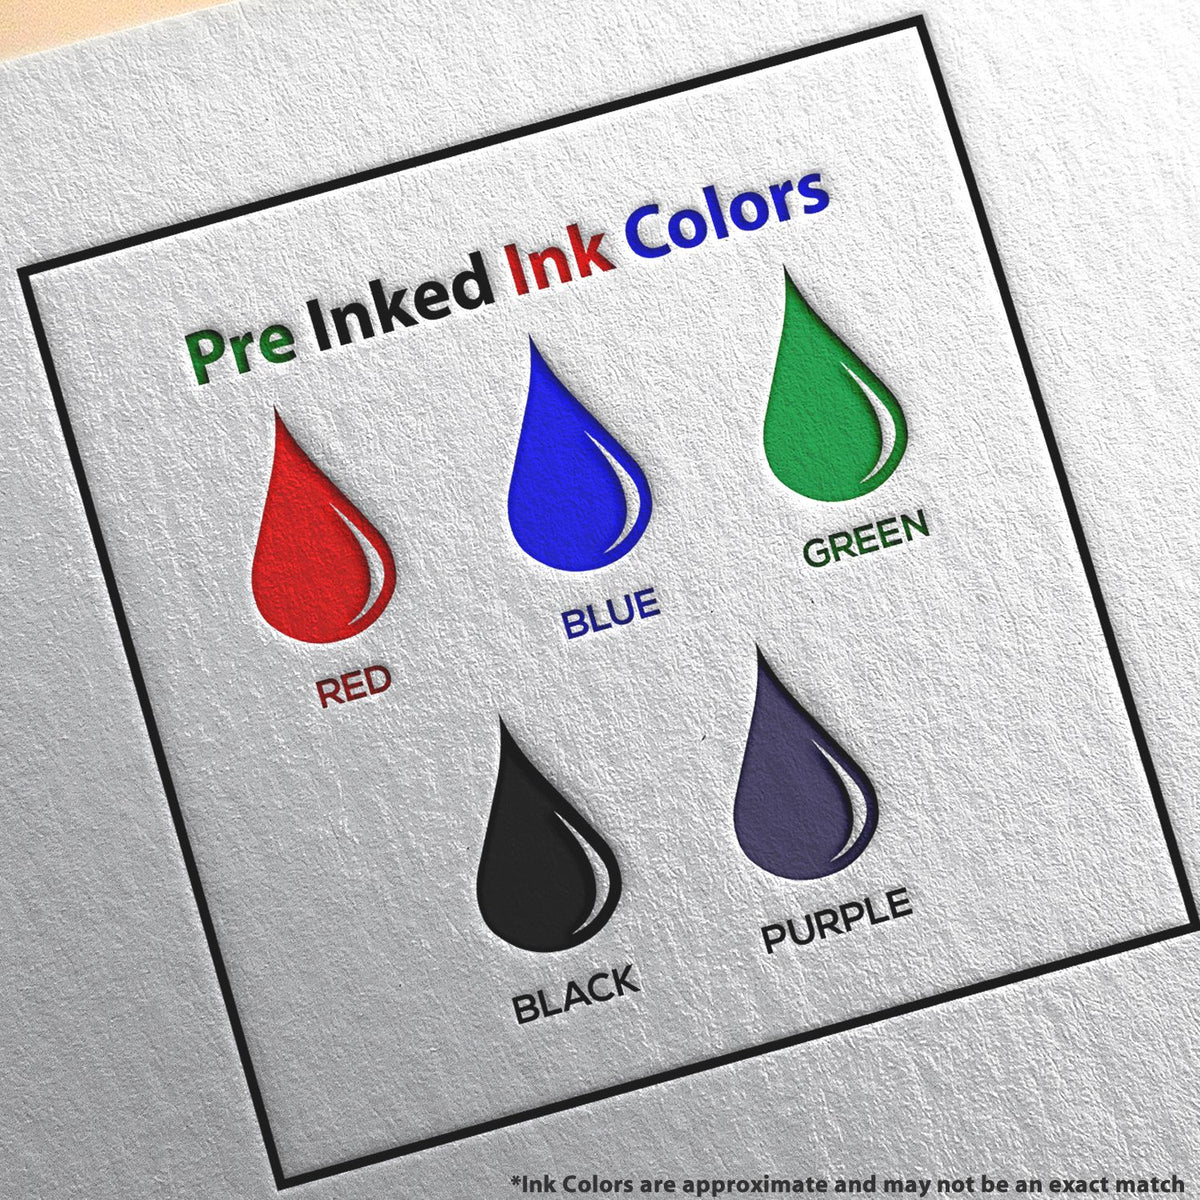 A picture showing the different ink colors or hues available for the Slim Pre-Inked Wisconsin Land Surveyor Seal Stamp product.